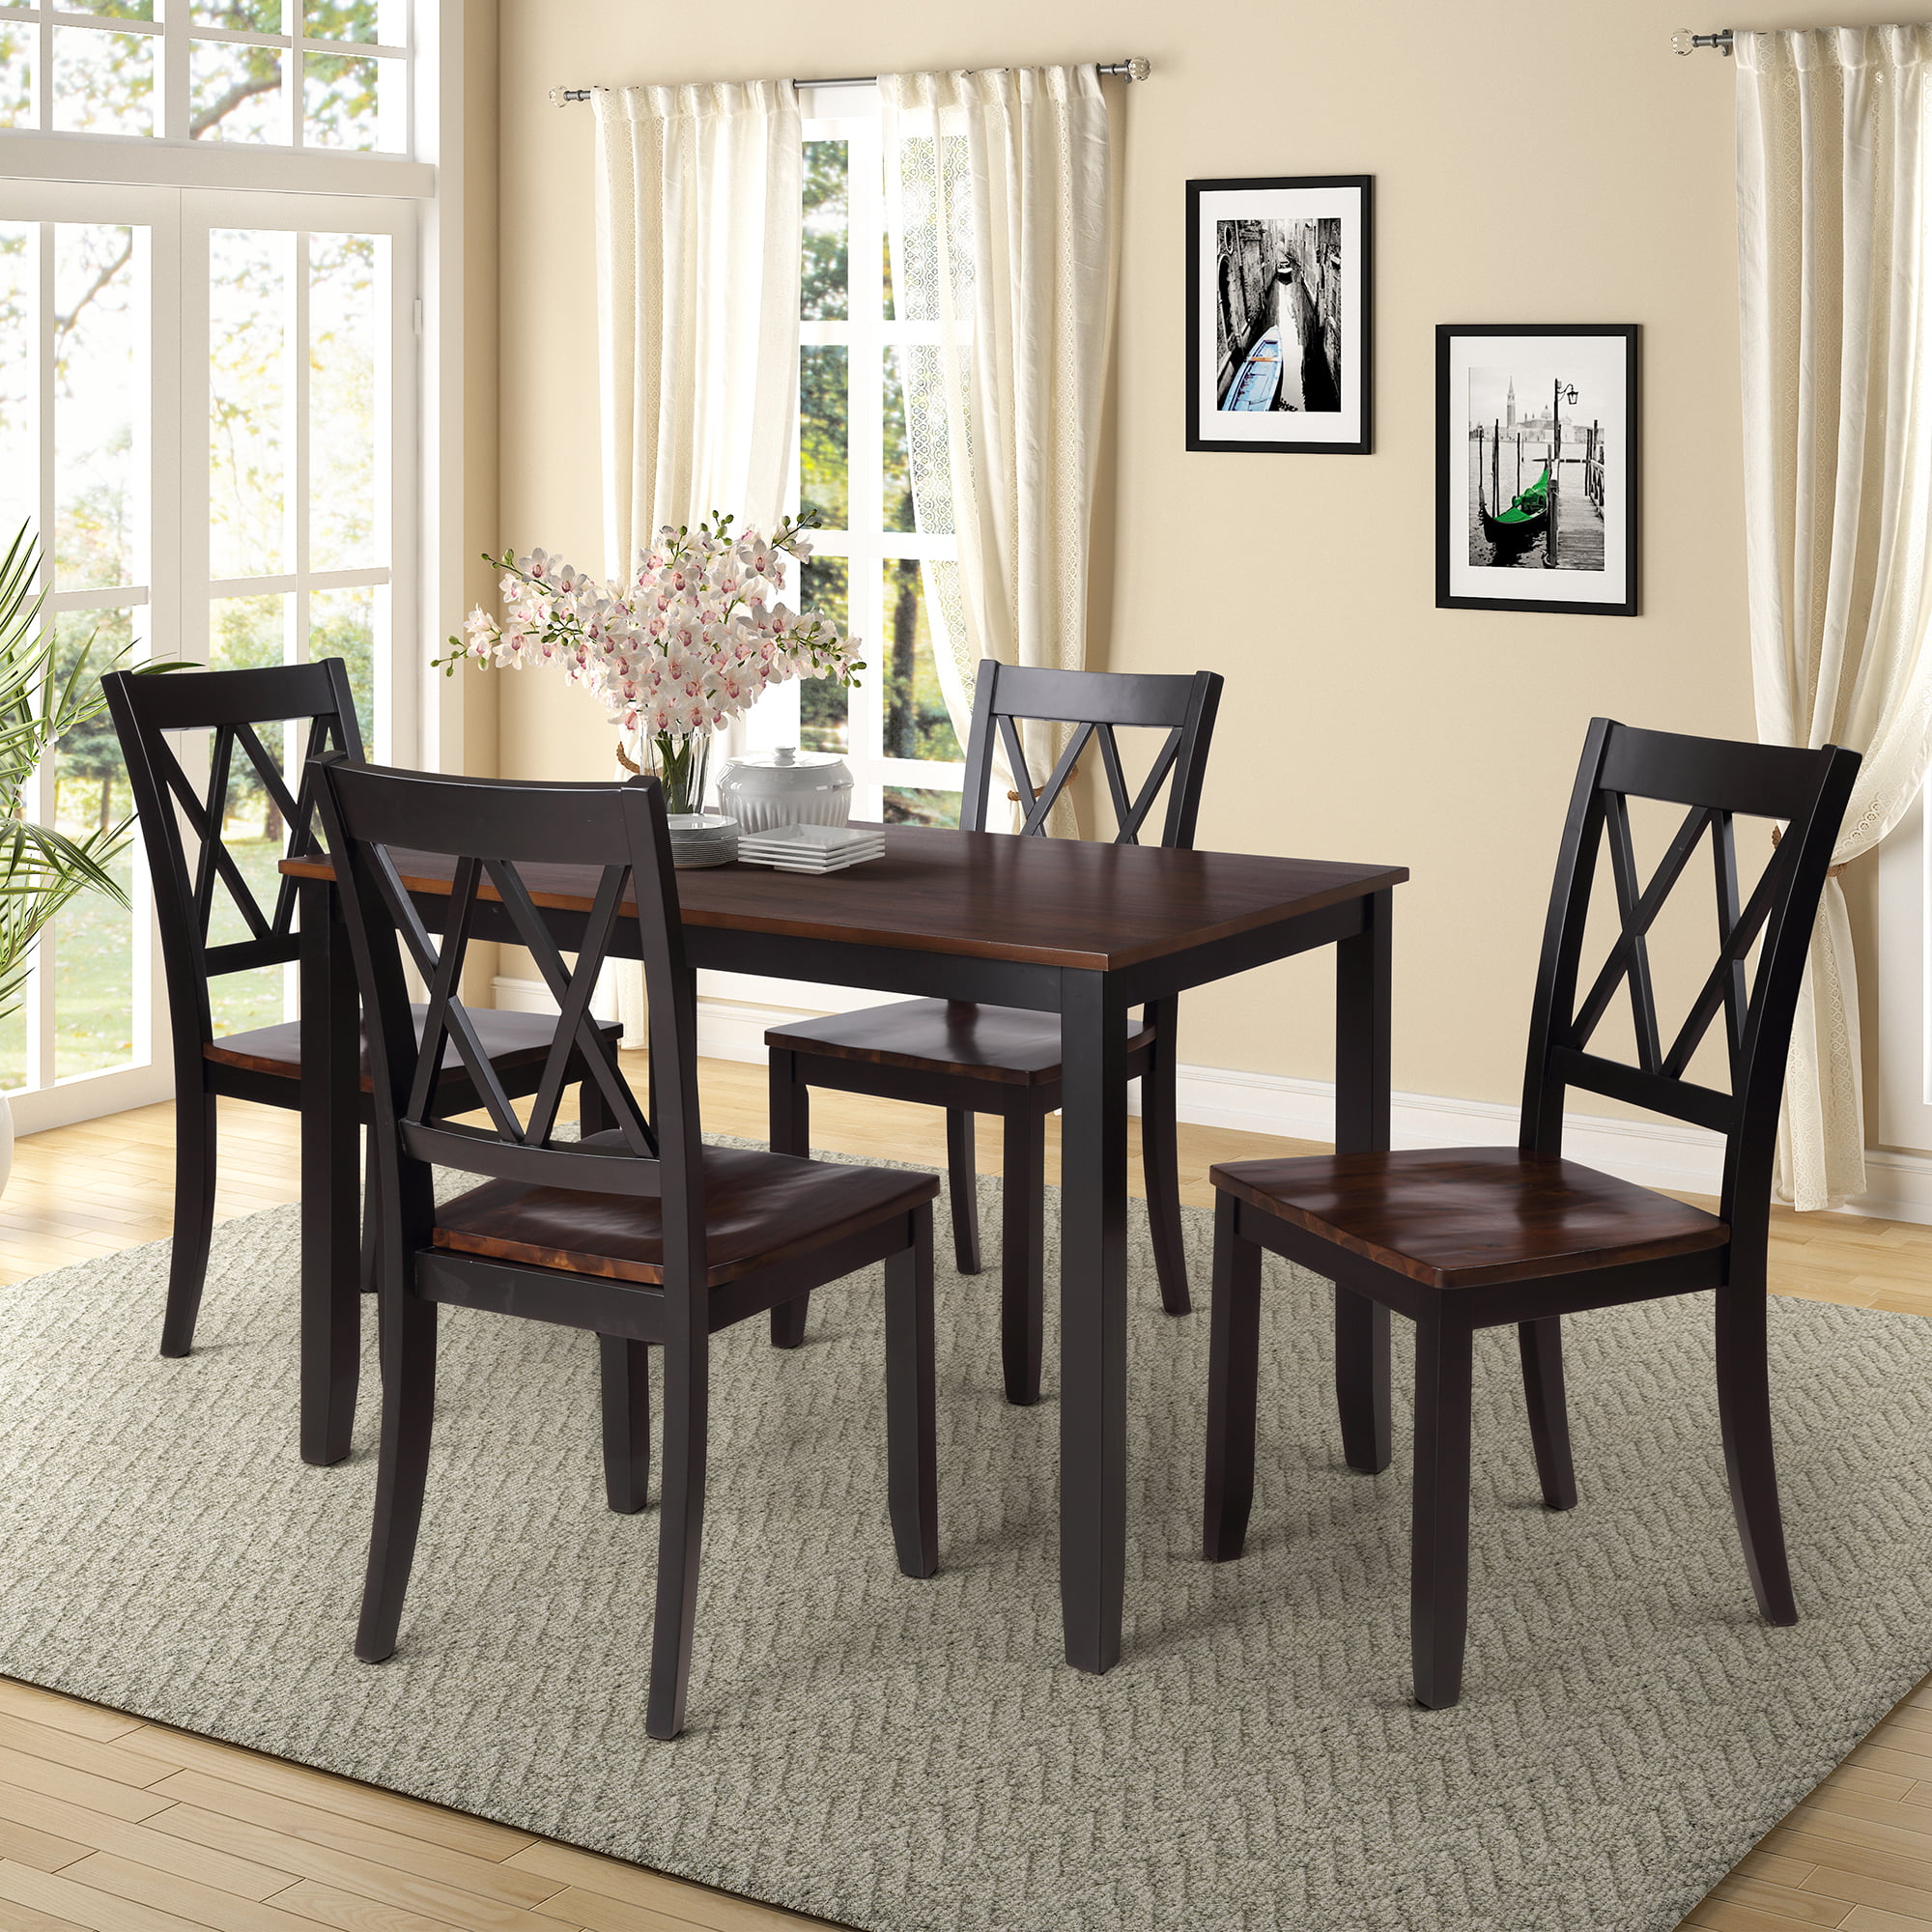 Modern 5 Piece Dining Sets, URHOMEPRO Wooden Dining Table 